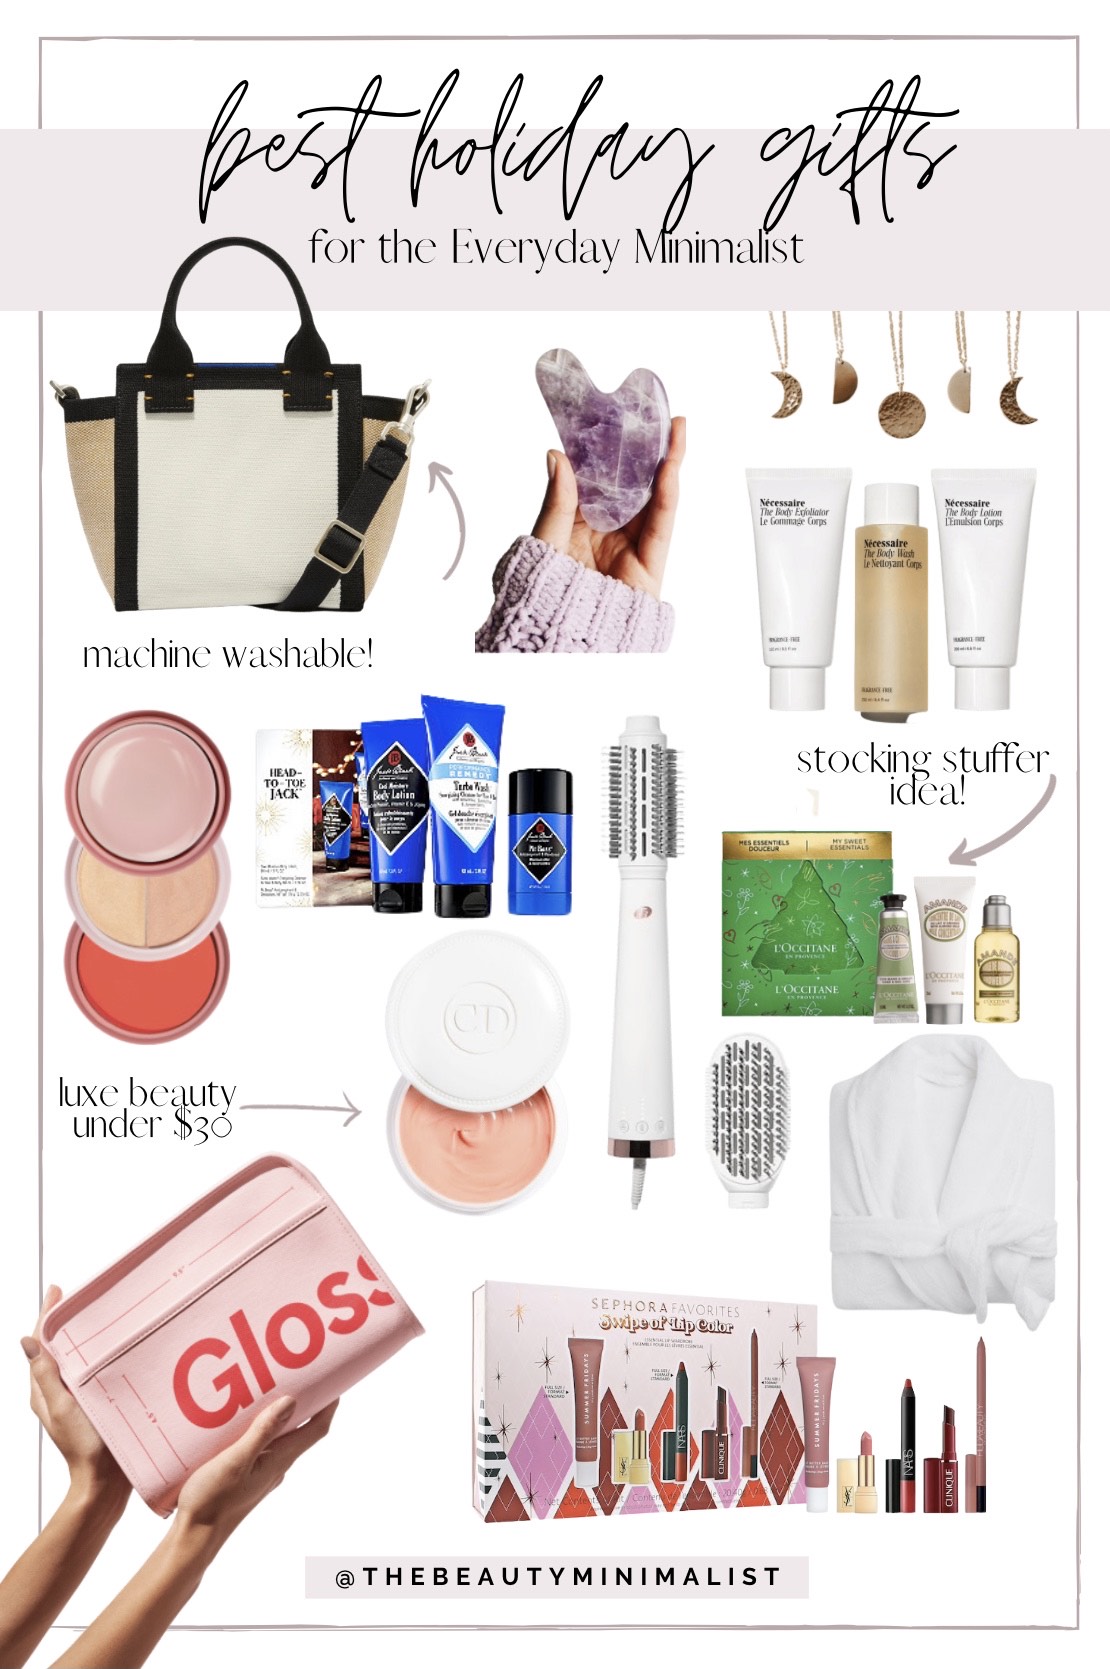 12 holiday gift ideas for the everyday minimalist - handbags, makeup, skincare, jewelry